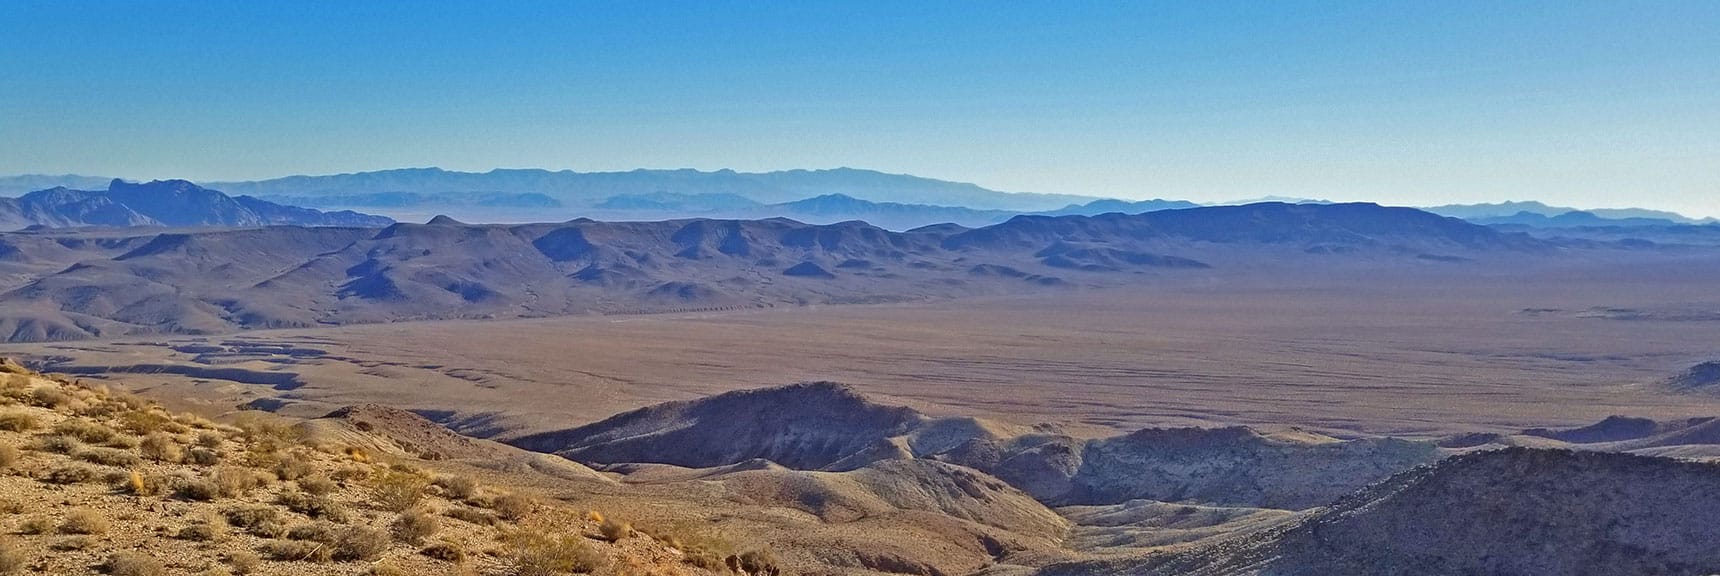 Mt. Charleston Wilderness as Distant Faint Background East of Dante's Ridge | Dante's View to Mt. Perry | Death Valley National Park, CA